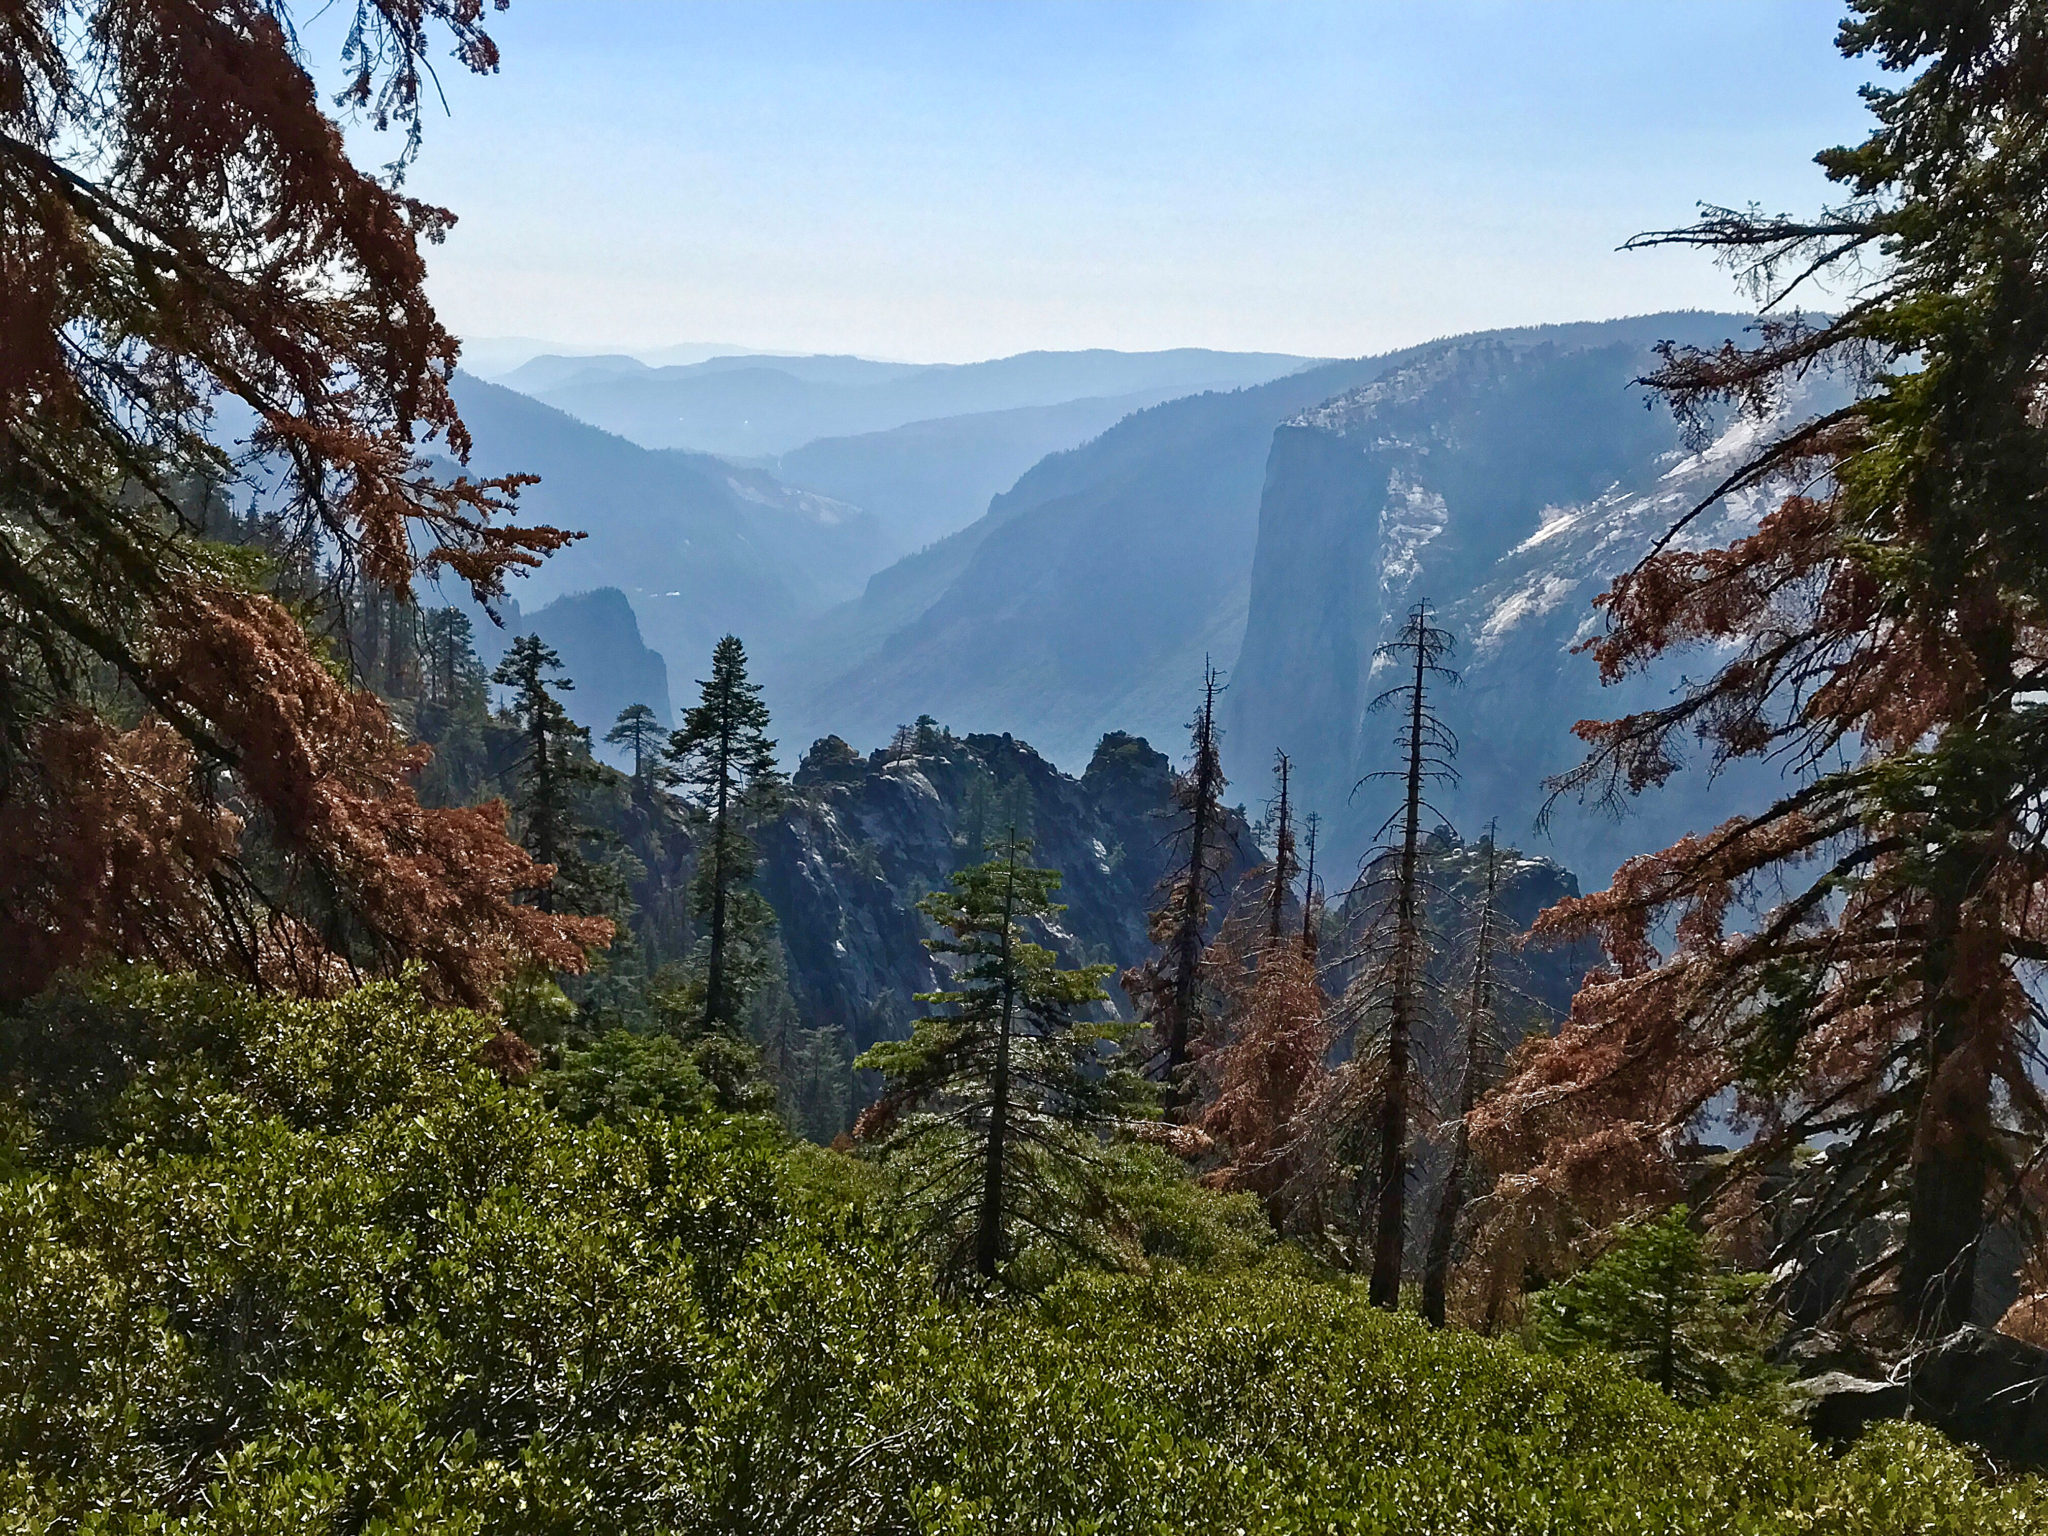 View of Yosemite Valley from Pohono Trail